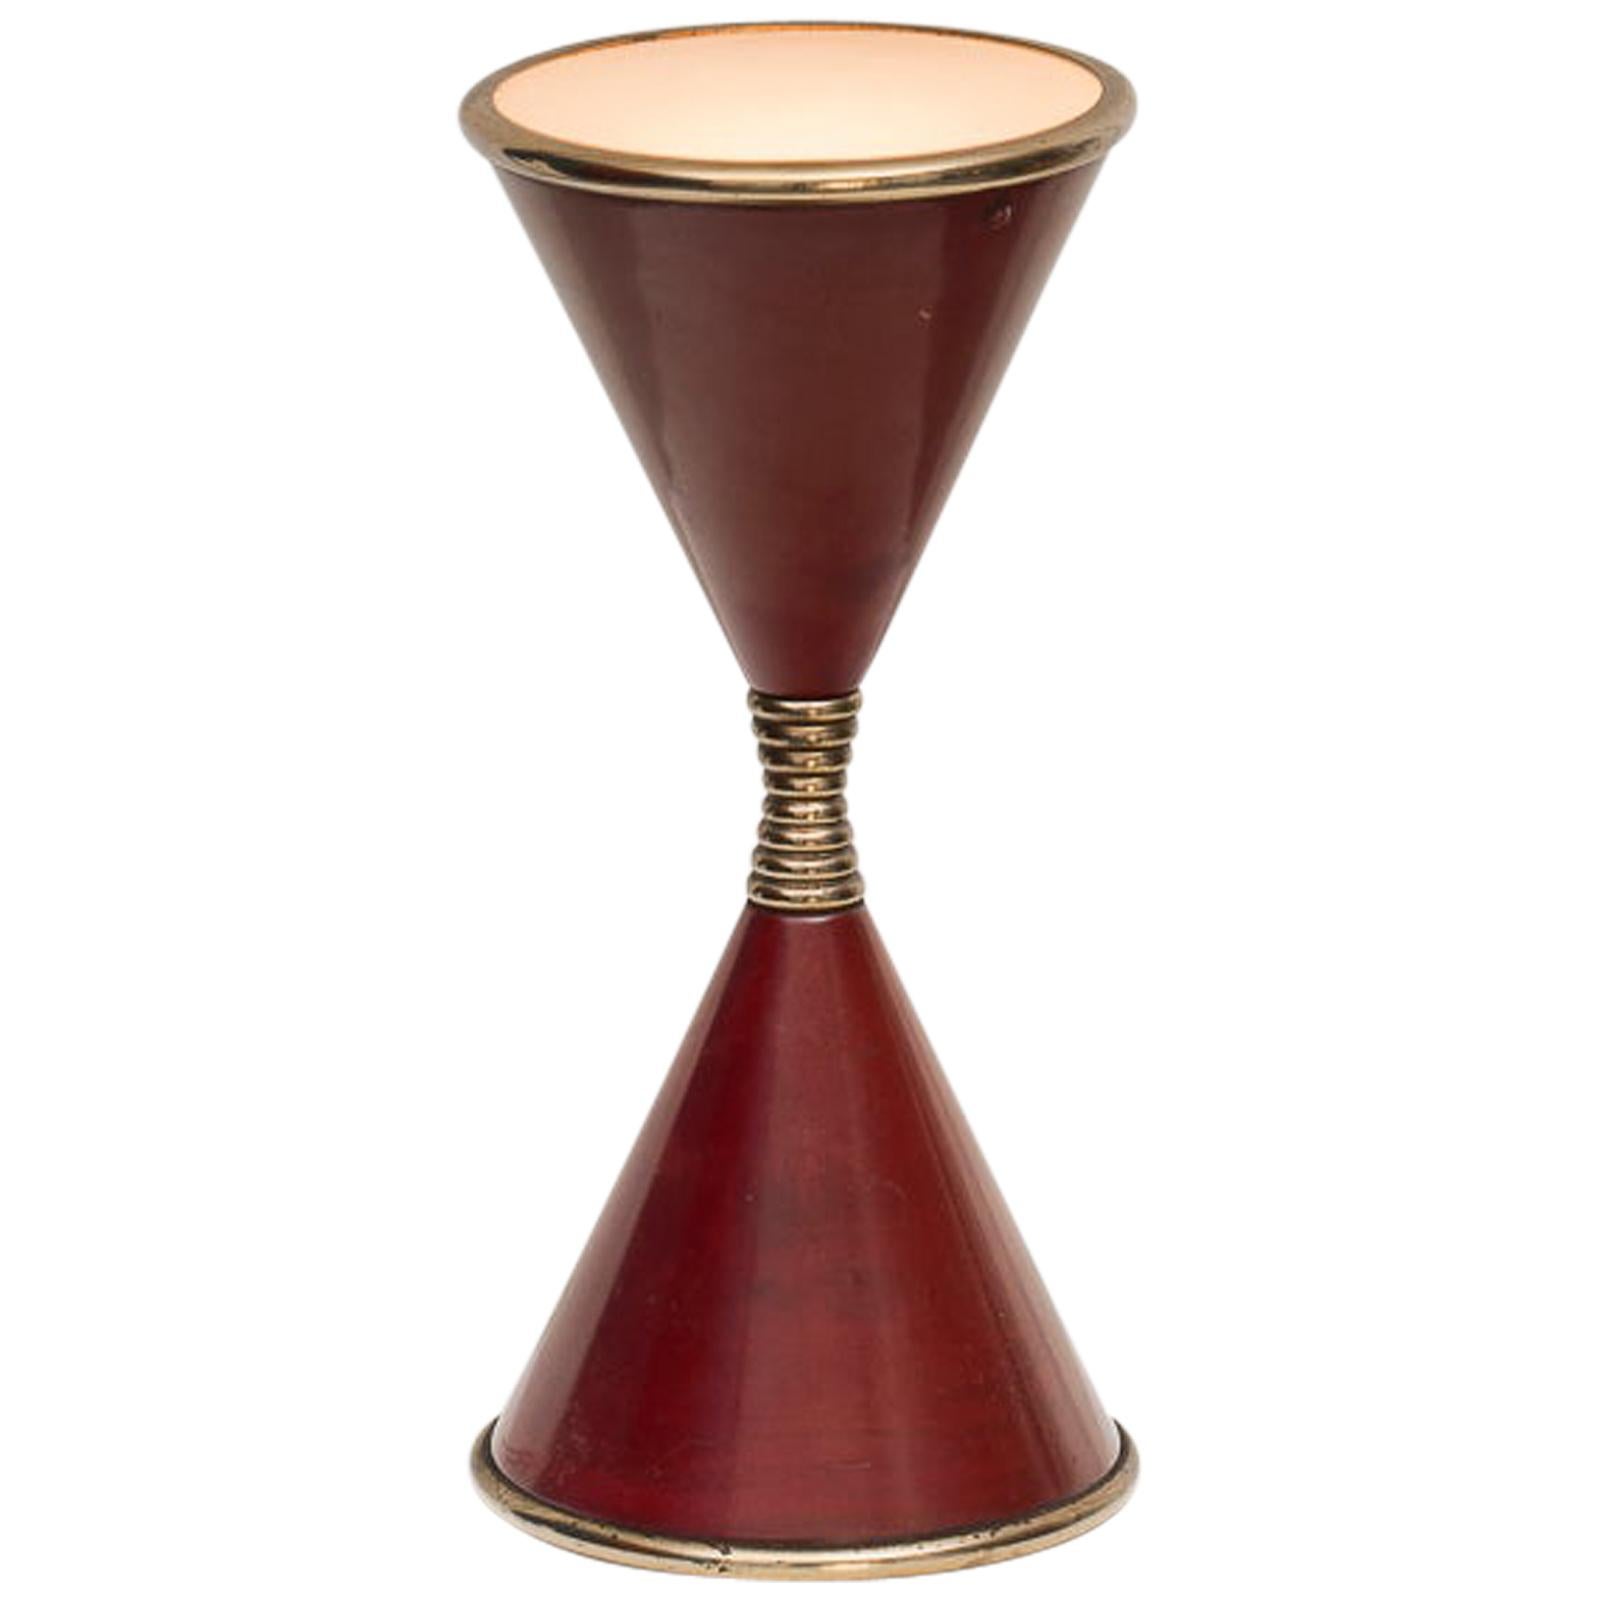 Arredoluce Midcentury Oxblood "Clessidra" Hourglass Table Lamp, 1960s For Sale